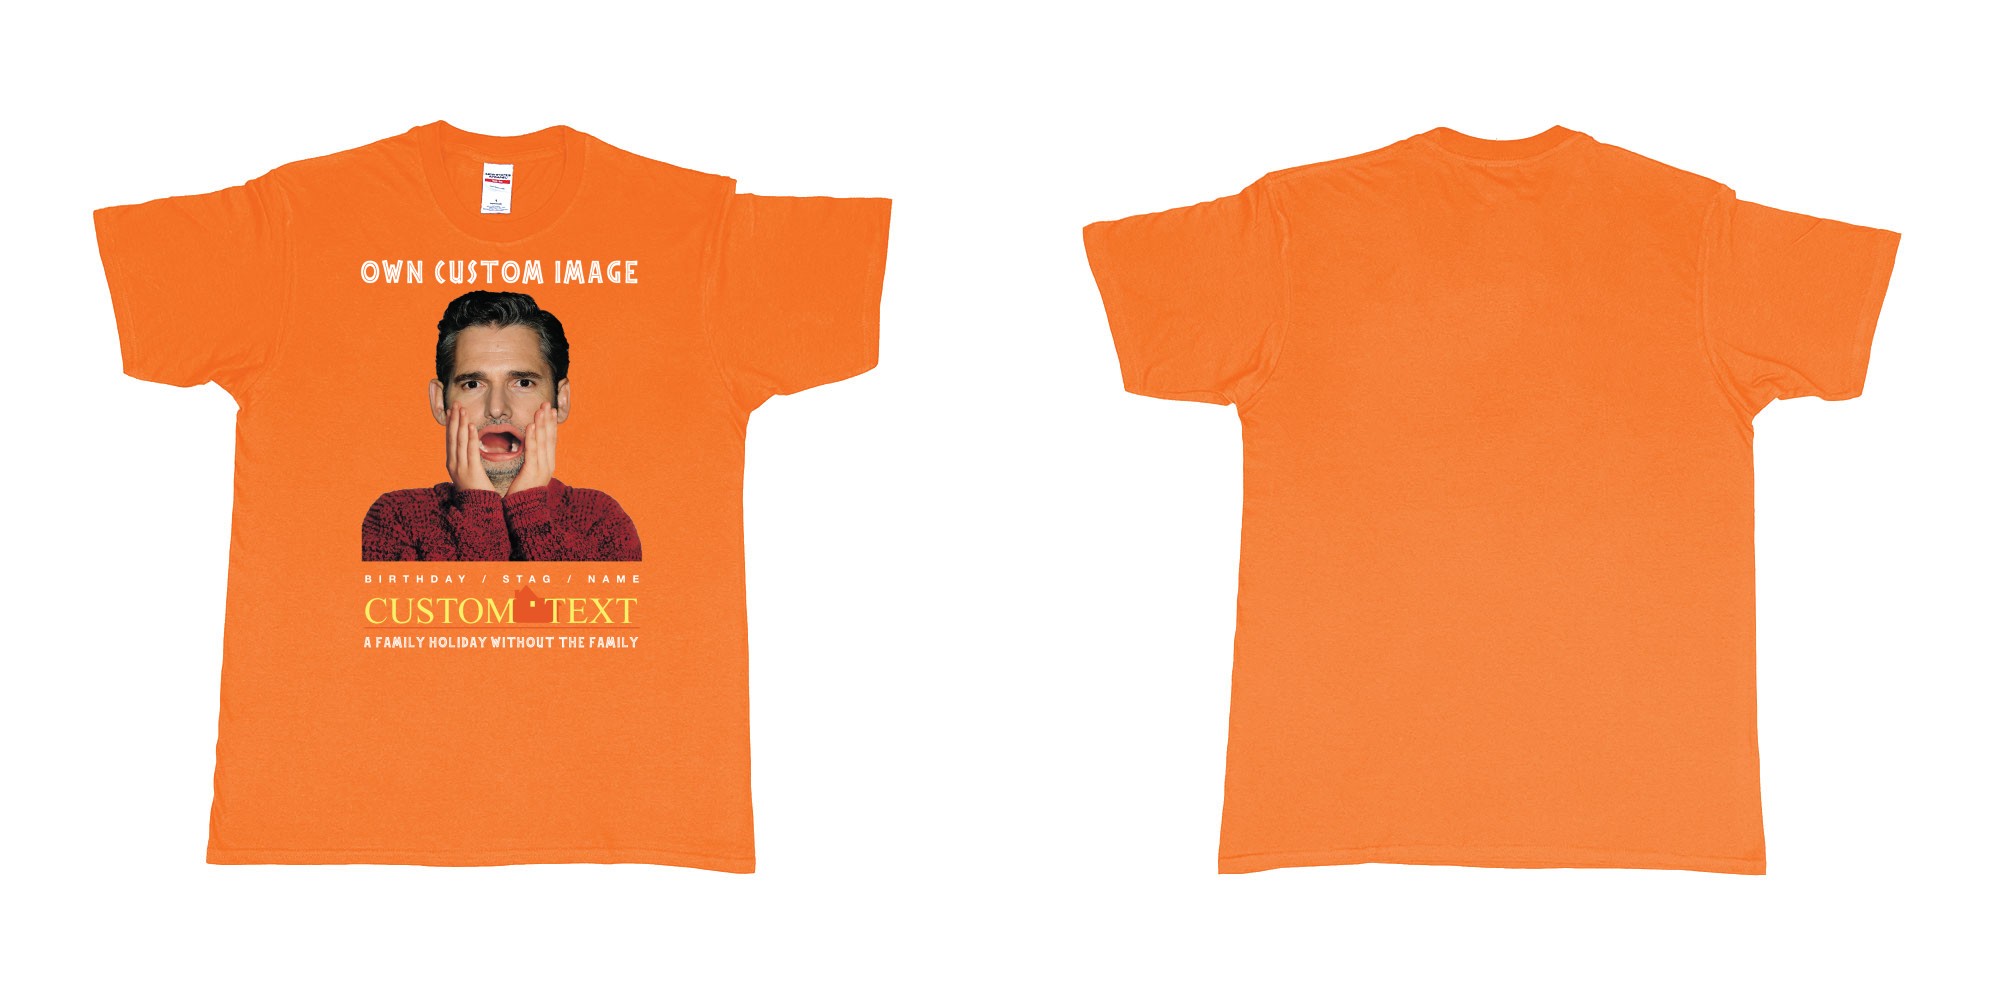 Custom tshirt design home alone custom image in fabric color orange choice your own text made in Bali by The Pirate Way